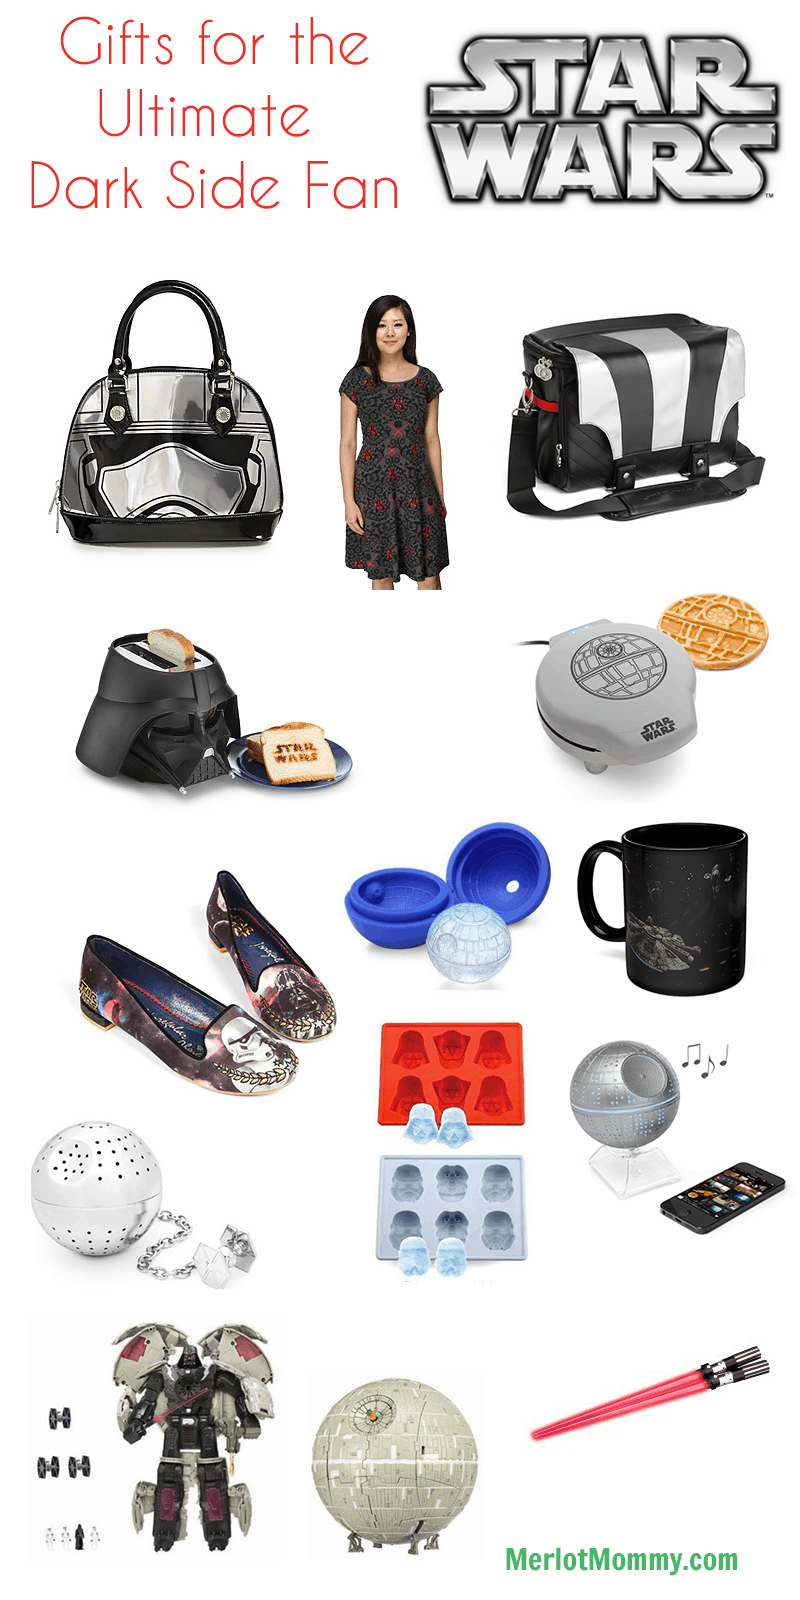 The Ultimate Star Wars Dark Side Gift Guide